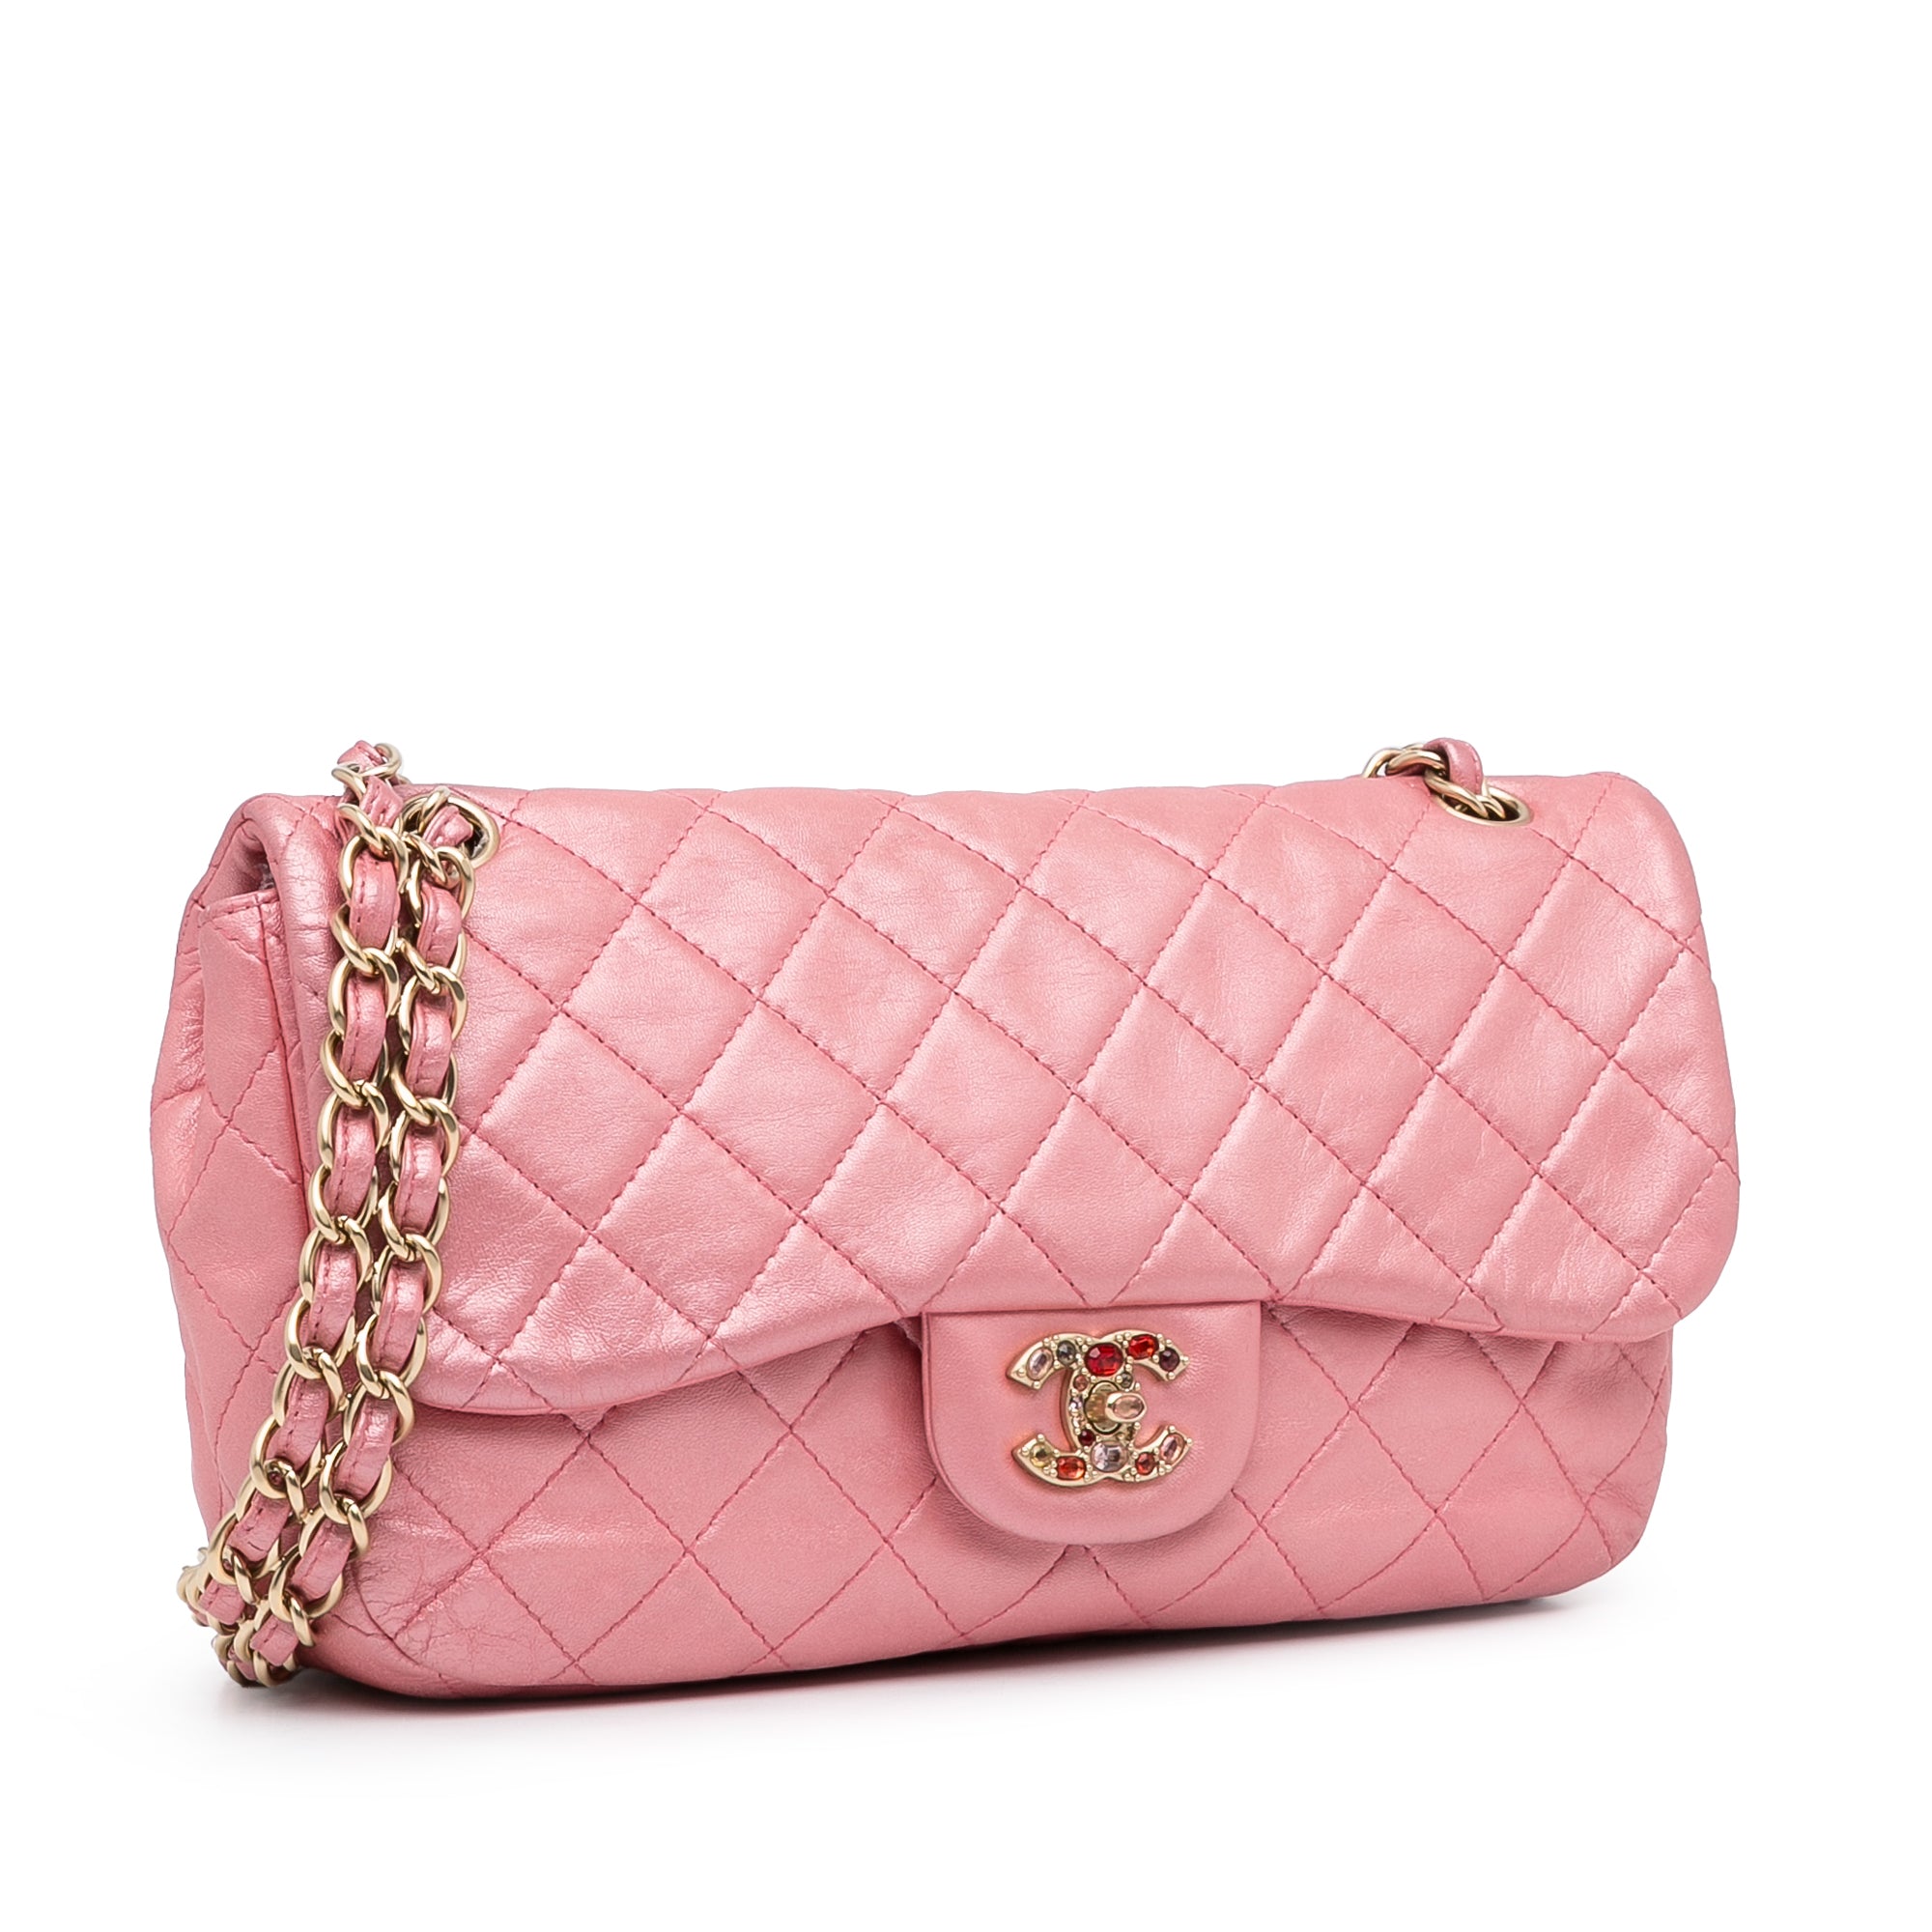 Chanel Pink Quilted Lambskin Square Mini Classic Flap Bag  myGemma  Item  120753